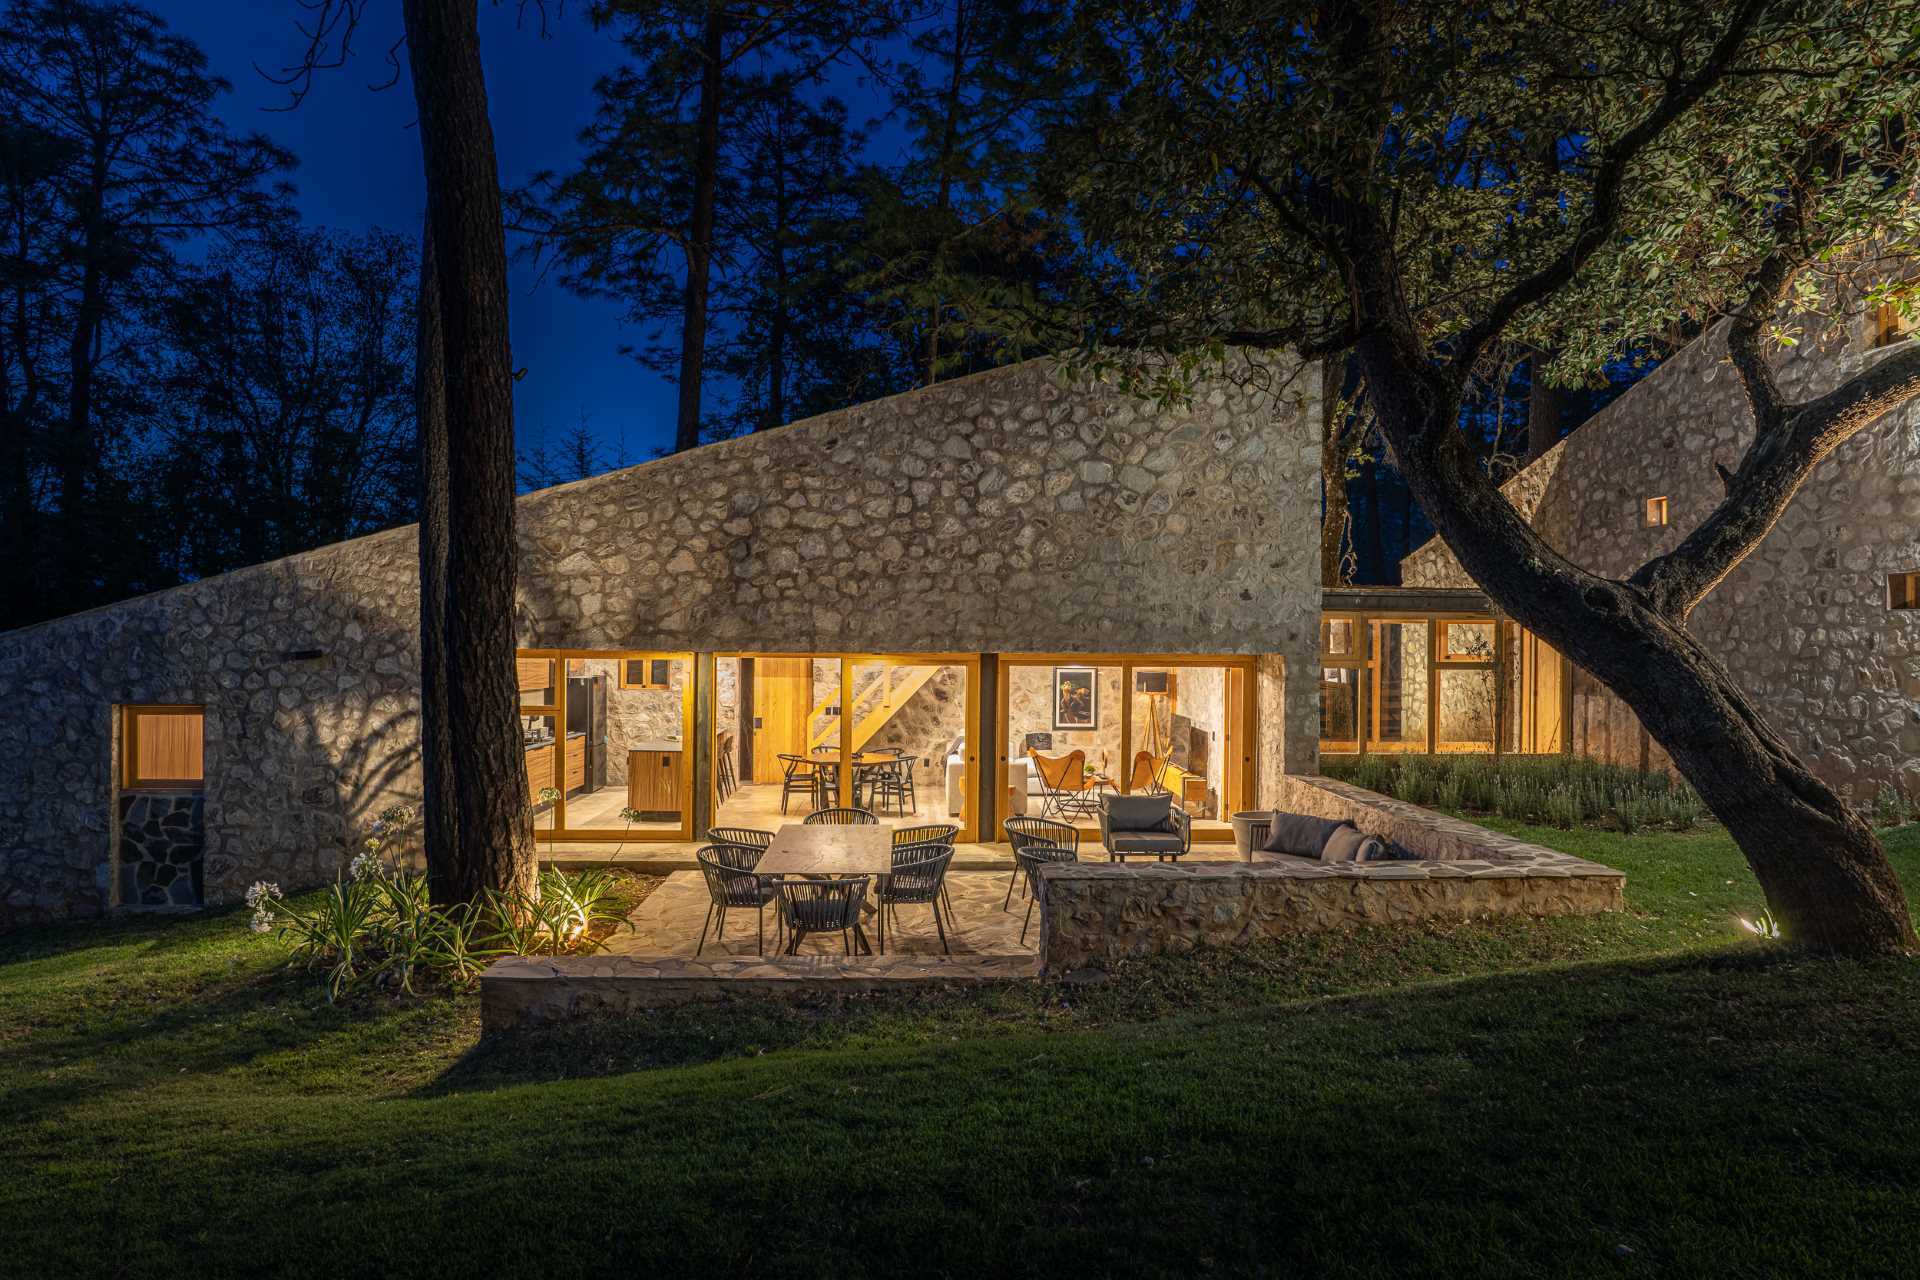 A contemporary stone, wood, and glass home with an outdoor patio.